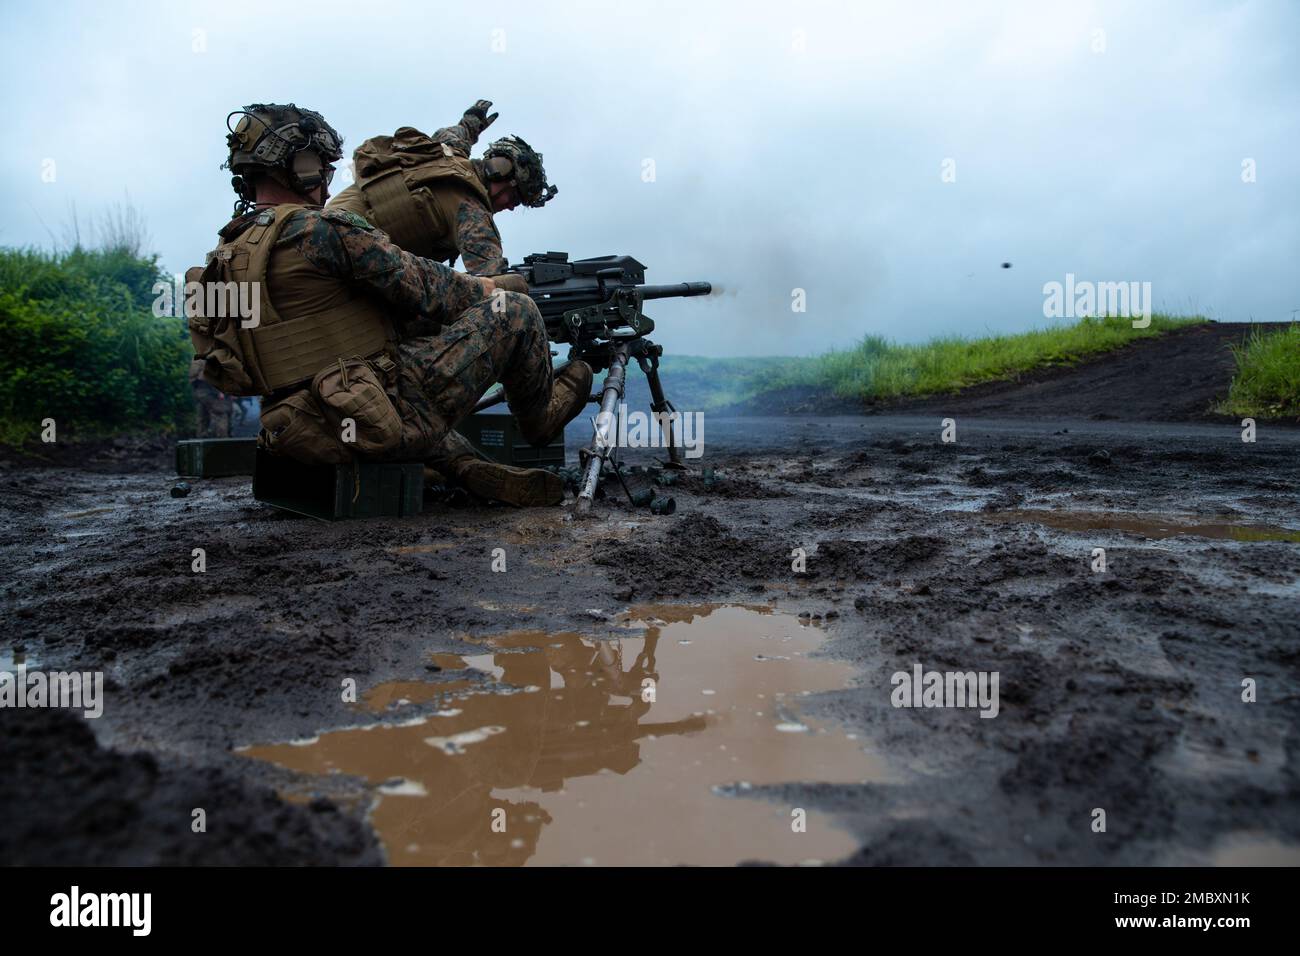 U.S. Marine Corps Cpl. John Cinnante (left) and Cpl. Tyler Somers (right), both machine gunners with 3d Battalion, 2d Marines fire a Mark 19 40 mm grenade machine gun during Exercise Shinka at Combined Arms Training Center, Camp Fuji, Japan, June 23, 2022. Shinka exemplifies a shared commitment to realistic training that produces lethal, ready, and adaptable forces capable of decentralized operations across a wide range of missions. 3/2 is forward deployed in the Indo-Pacific under 4th Marines, 3d Marine Division as part of the Unit Deployment Program. Stock Photo